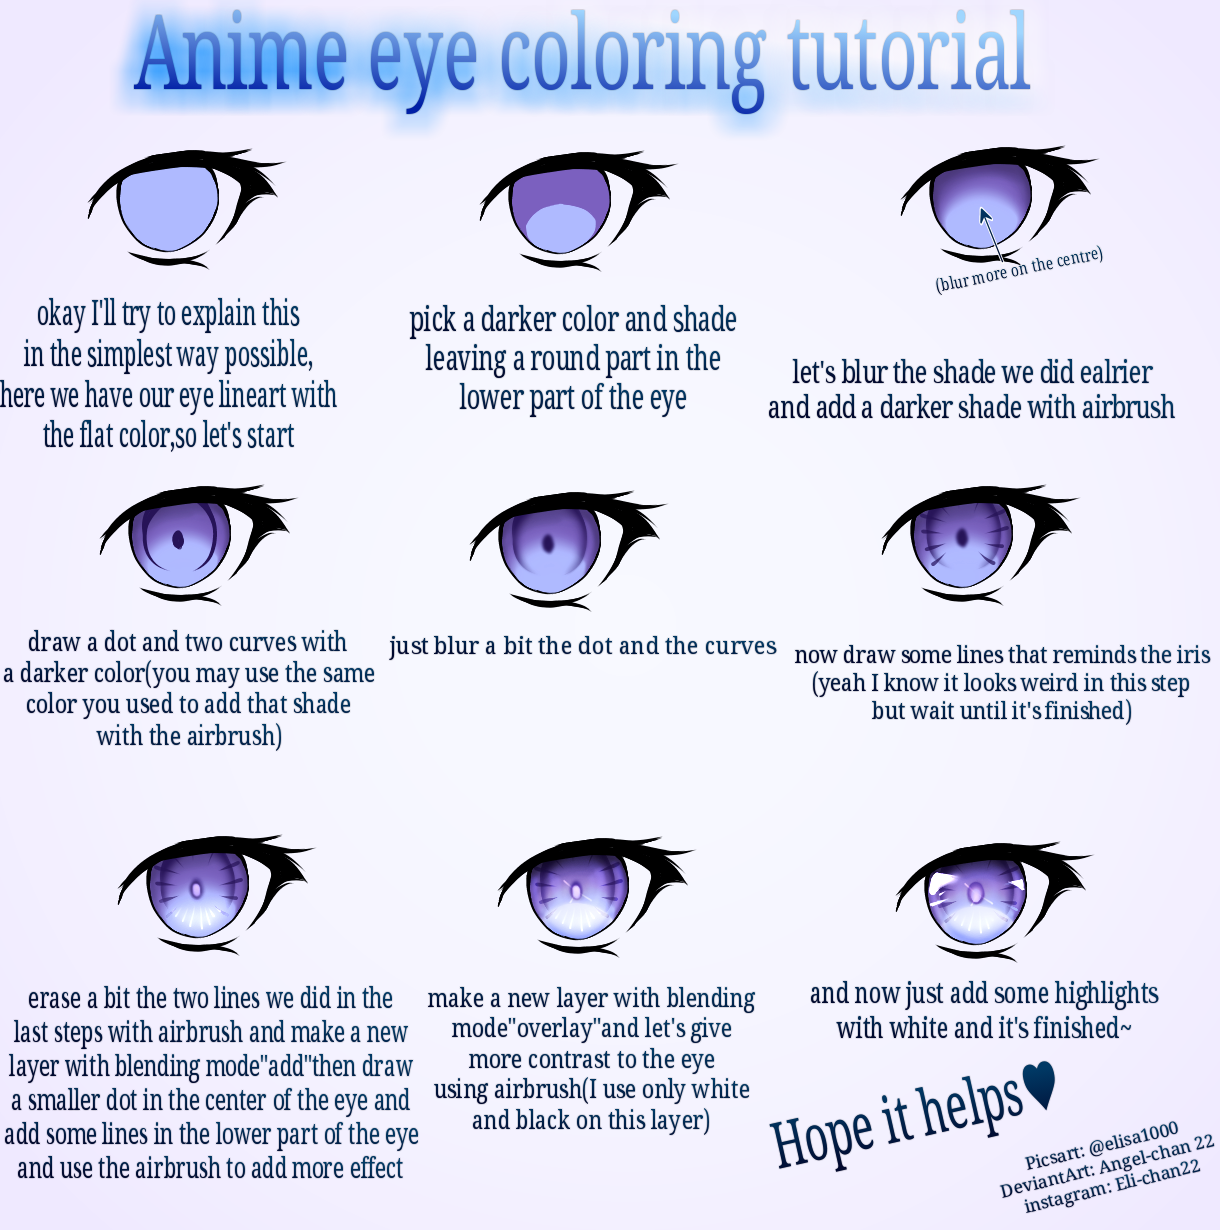 Anime Eye Coloring Tutorial by Angel-chan22 on DeviantArt